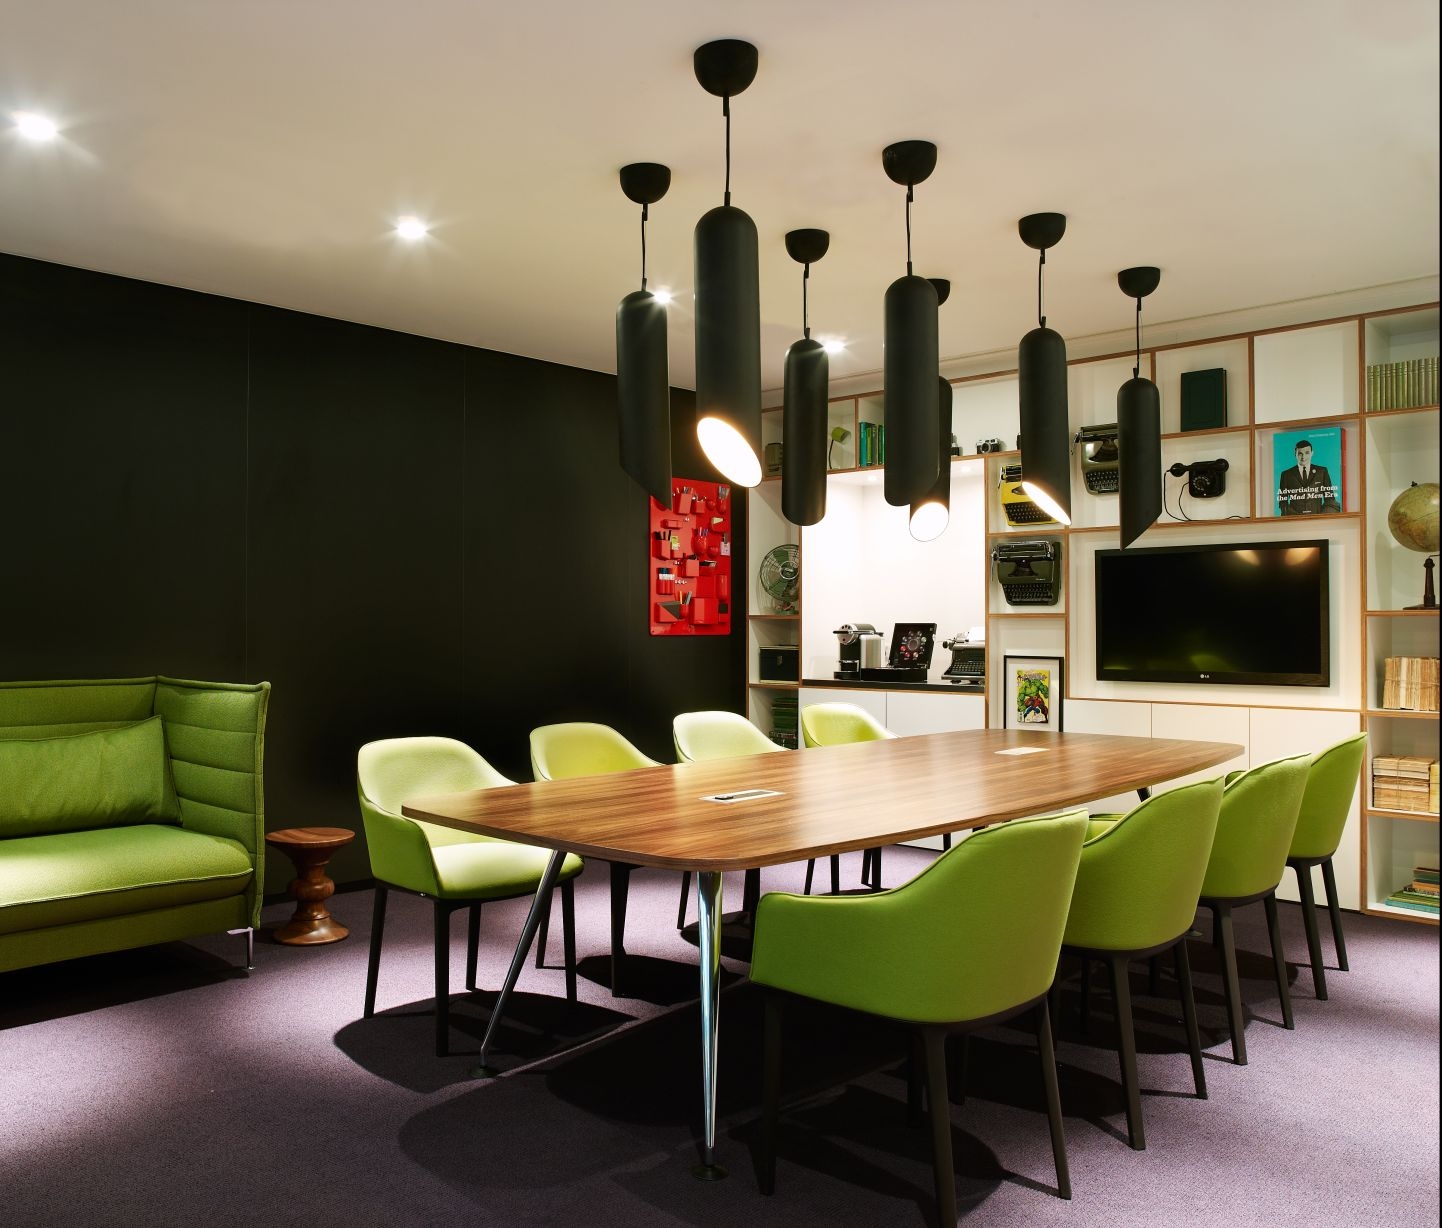 CitizenM Bankside London - Meeting Room